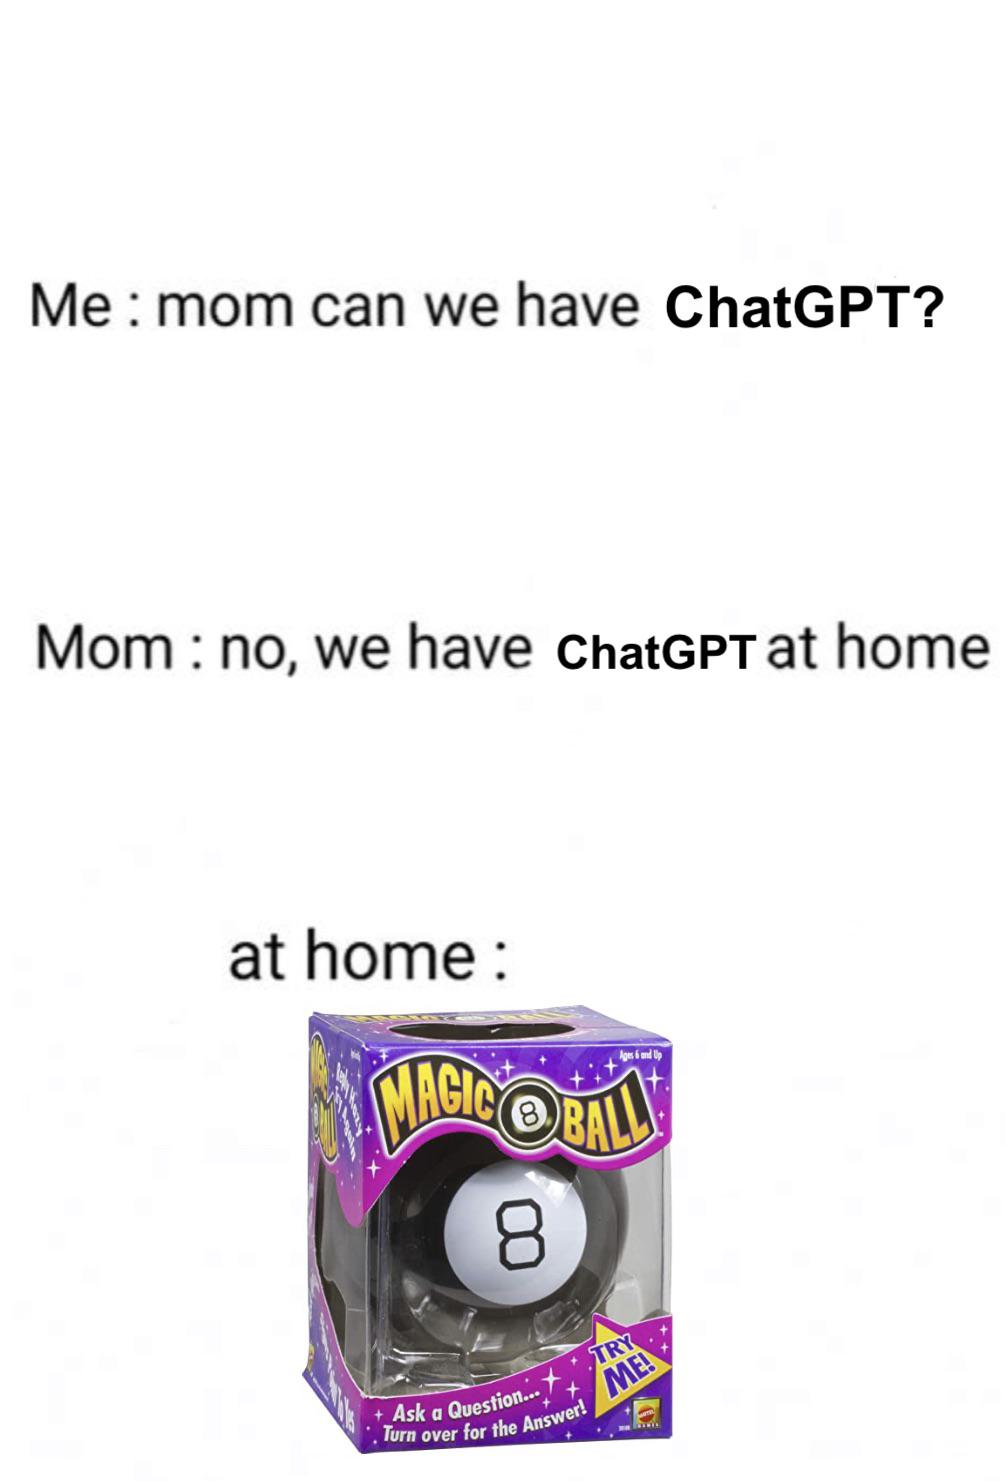 funny memes -  magic 8 ball target - Me mom can we have ChatGPT? Mom no, we have ChatGPT at home at home Ages 6 and Up Magicobally 8 Ask a Question... Turn over for the Answer! Try Me! www.